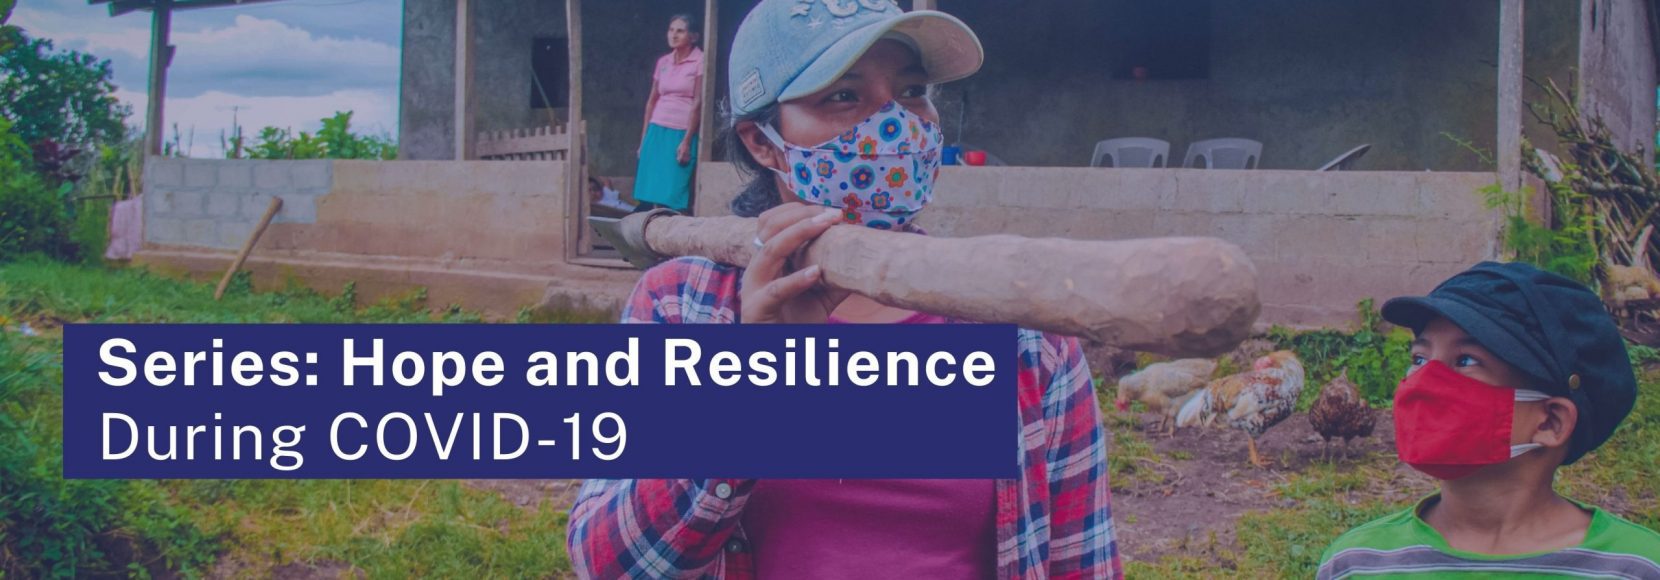 resilience and hope are keys to survival during COVID-19. hoto of woman in Nicaragua wearing a mask and walking with her son who is also wearing a mask. Text says 